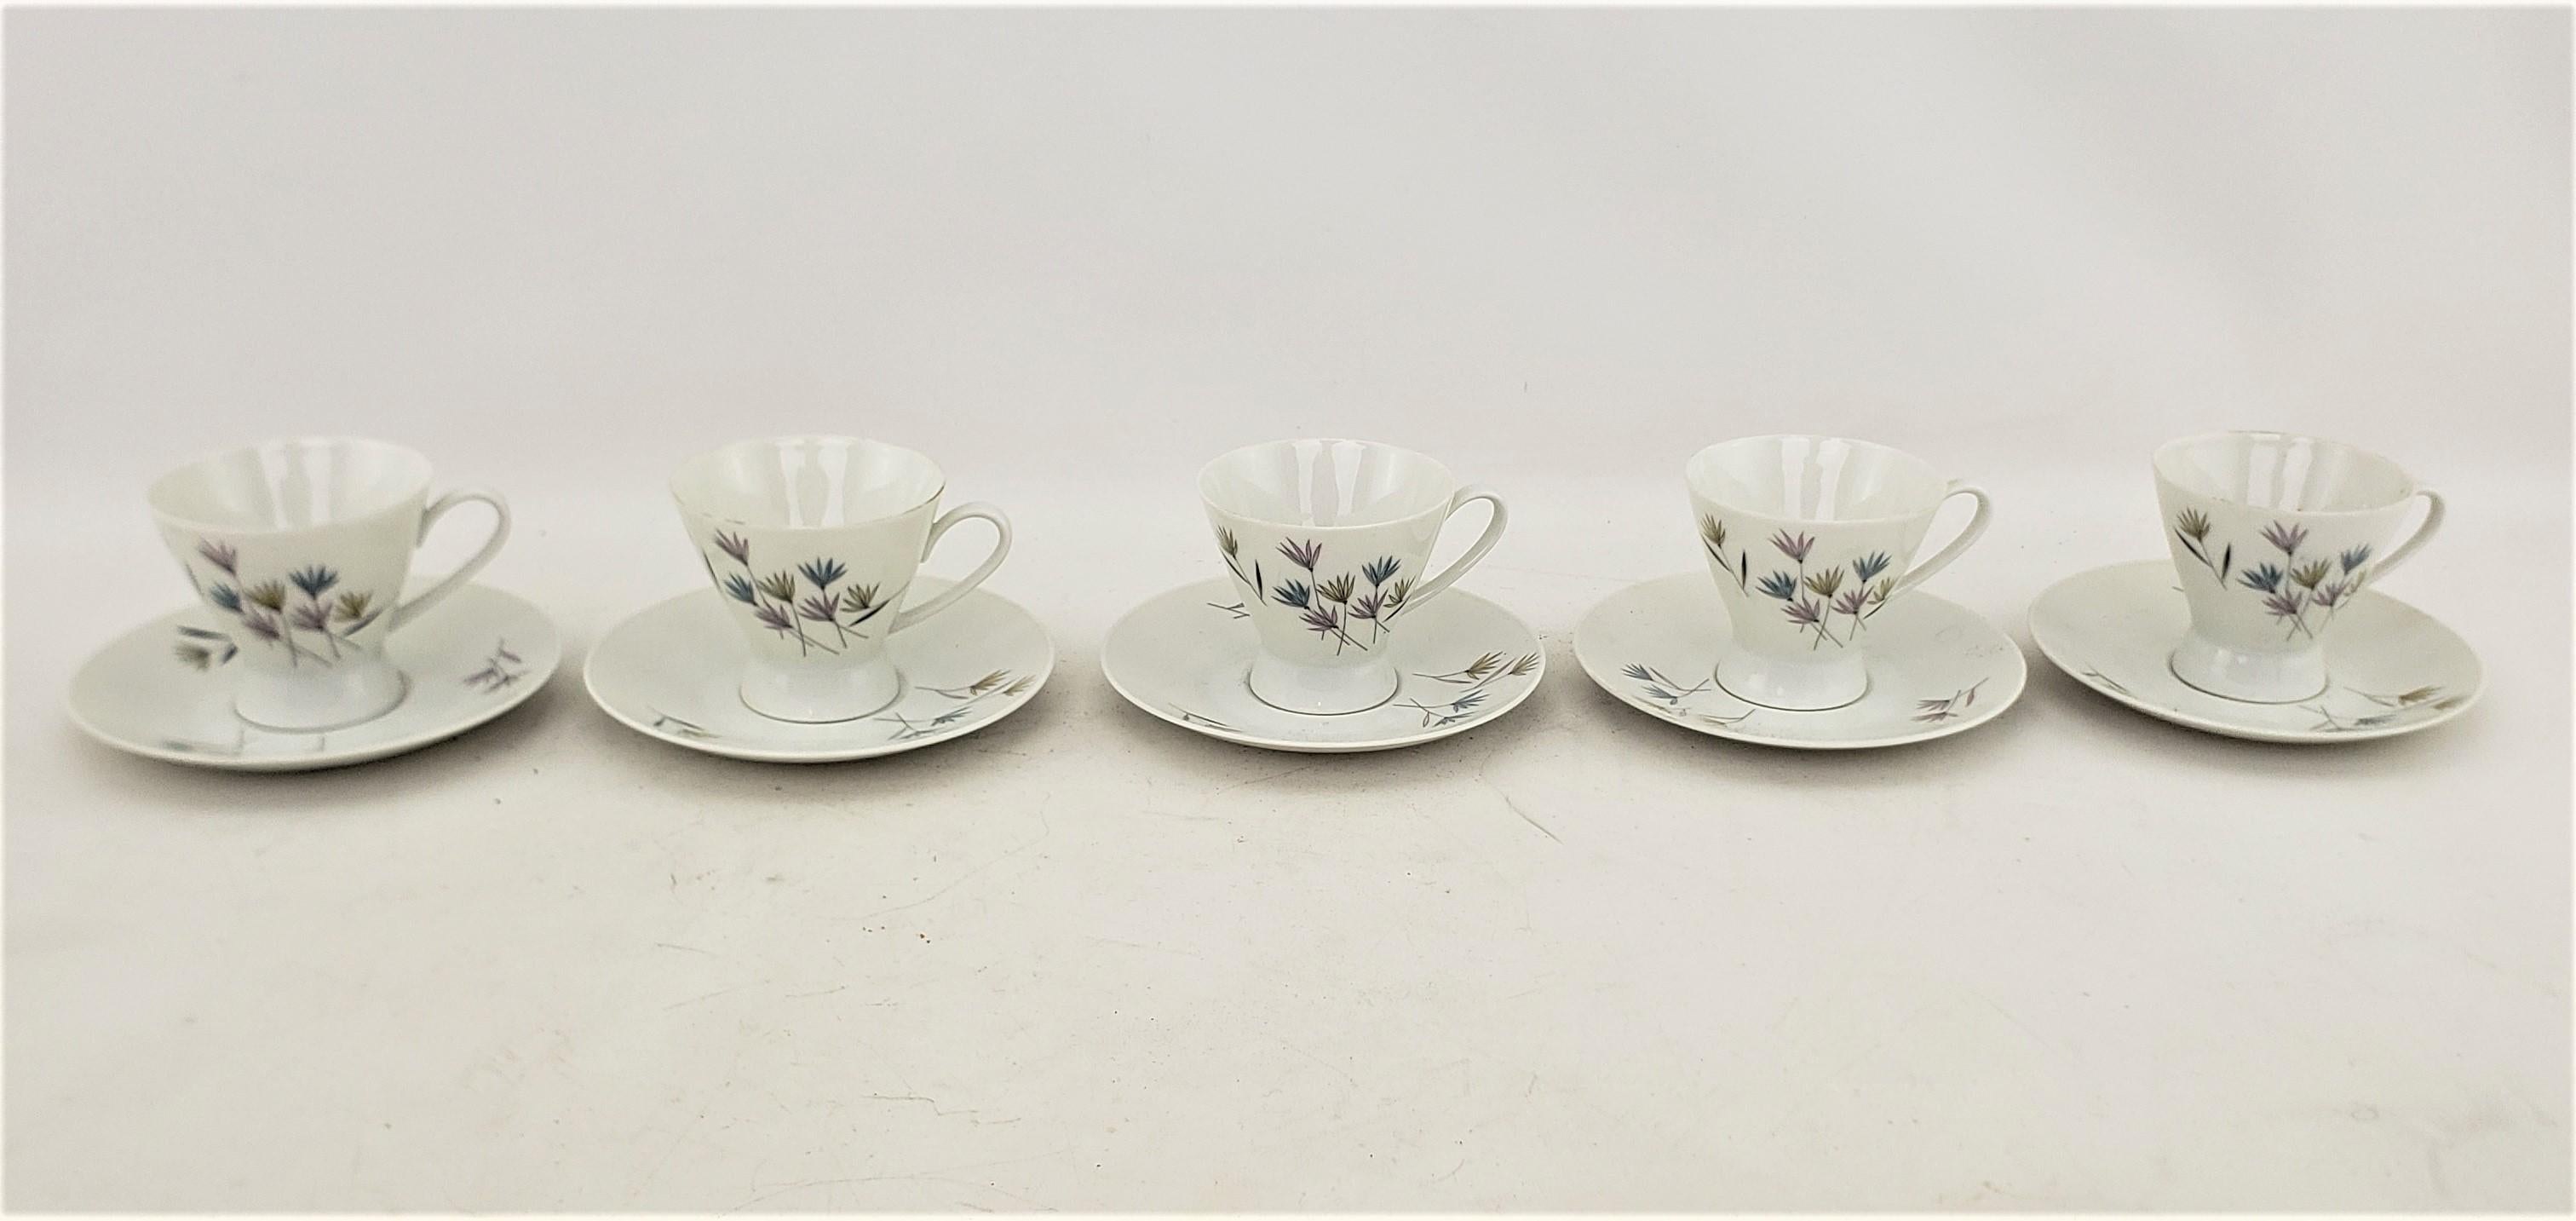 Porcelain Mid-Century Rosenthal by Raymond Loewy Form 2000 Partial Dinner Set: 26 Pcs For Sale